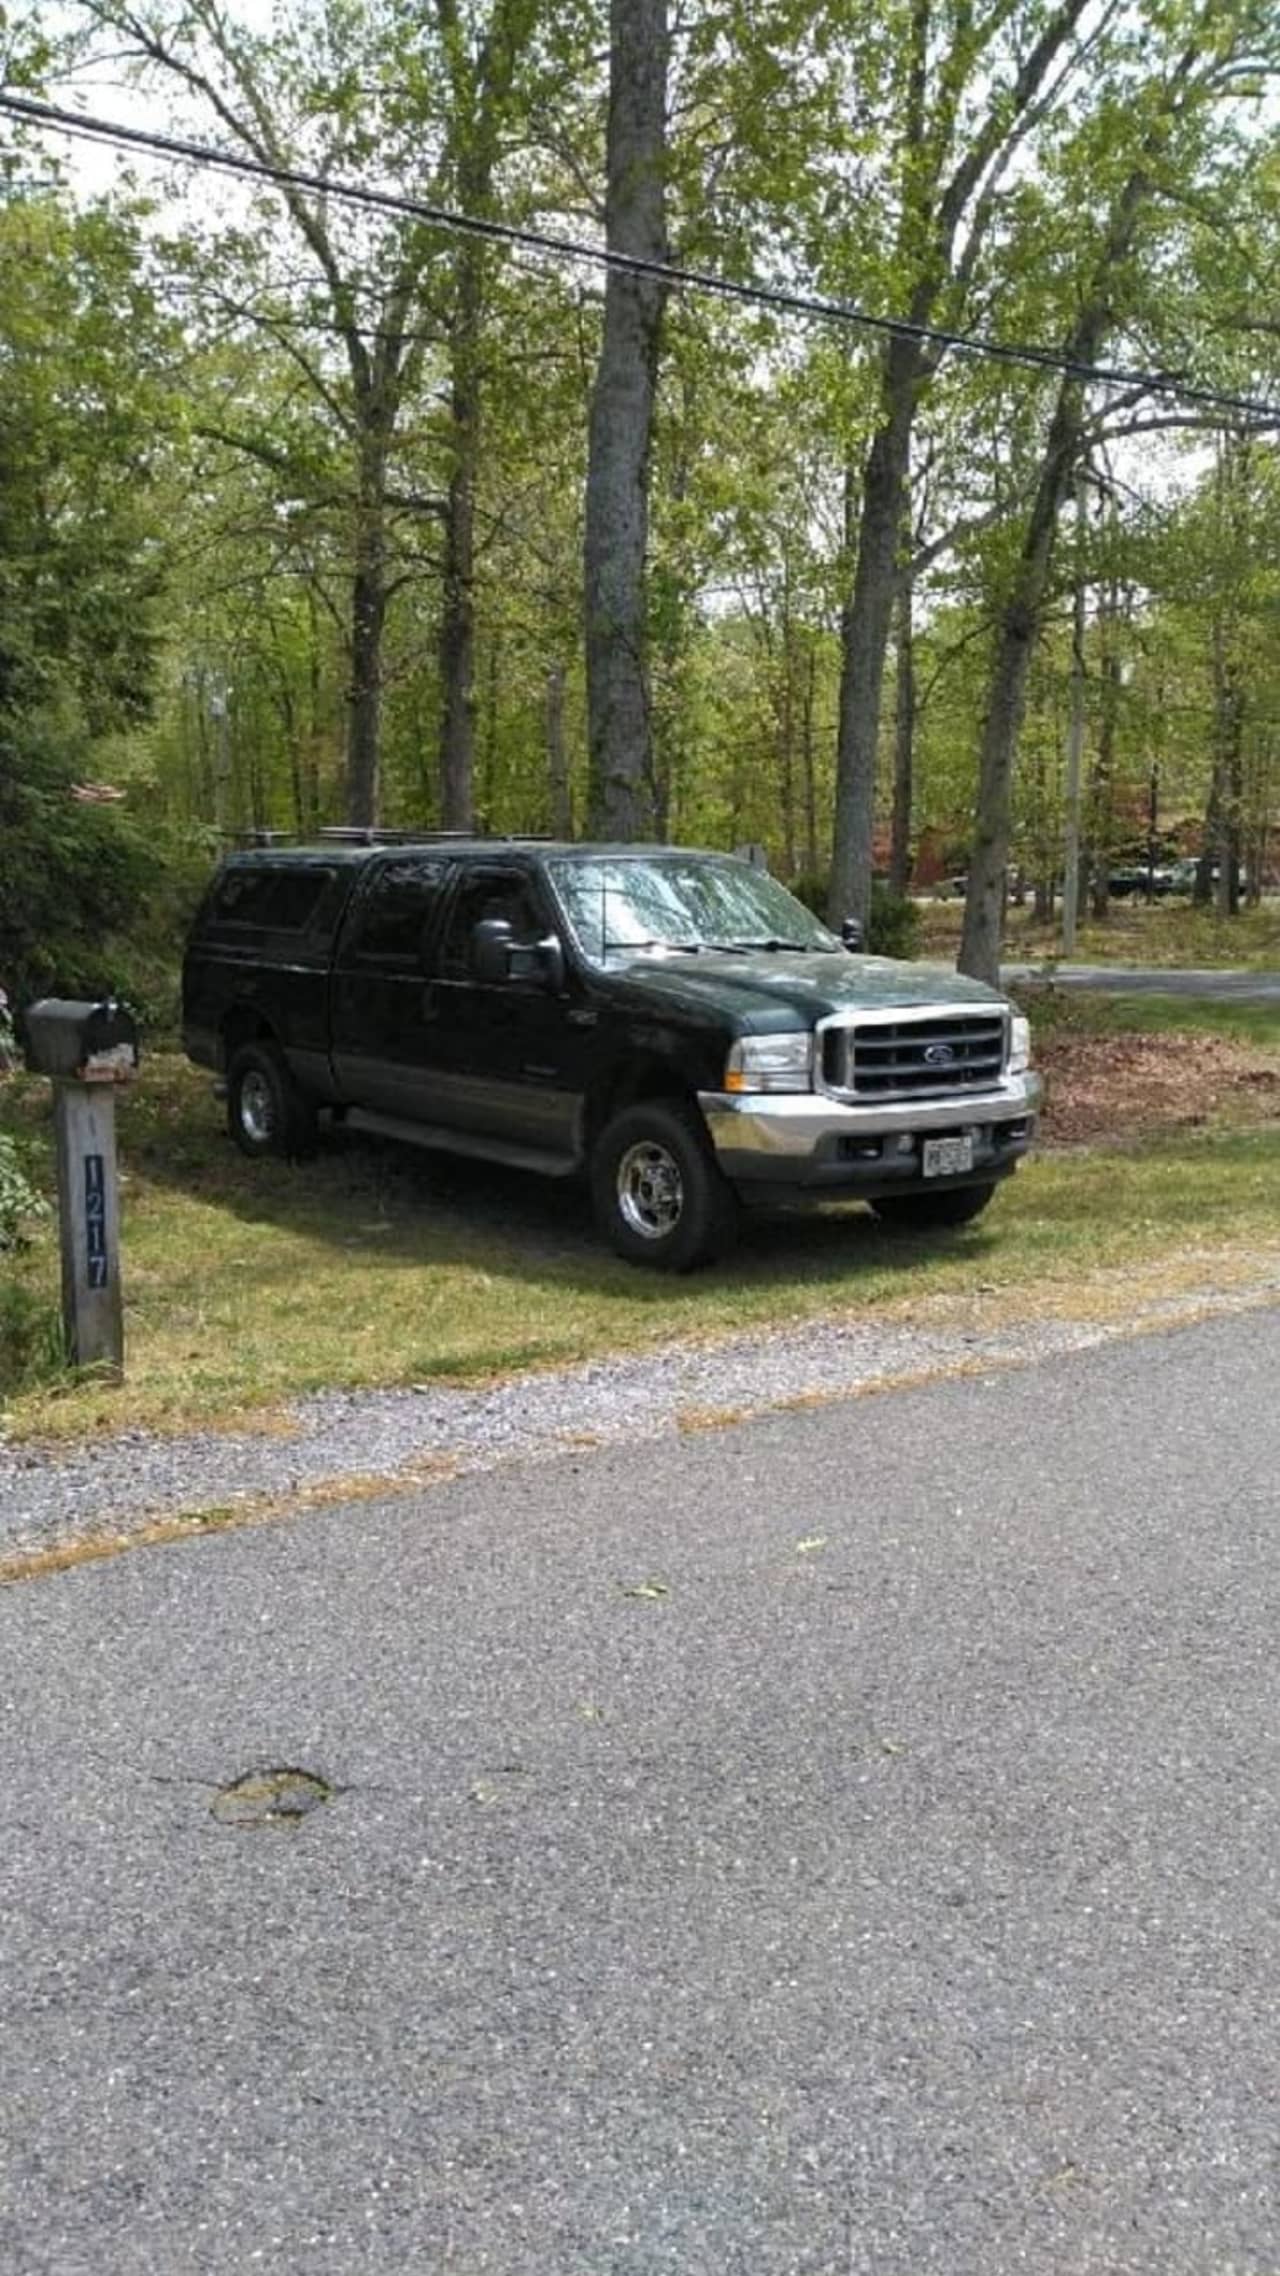 Authorities are seeking the public's help in locating a vehicle stolen out of Atlantic County.